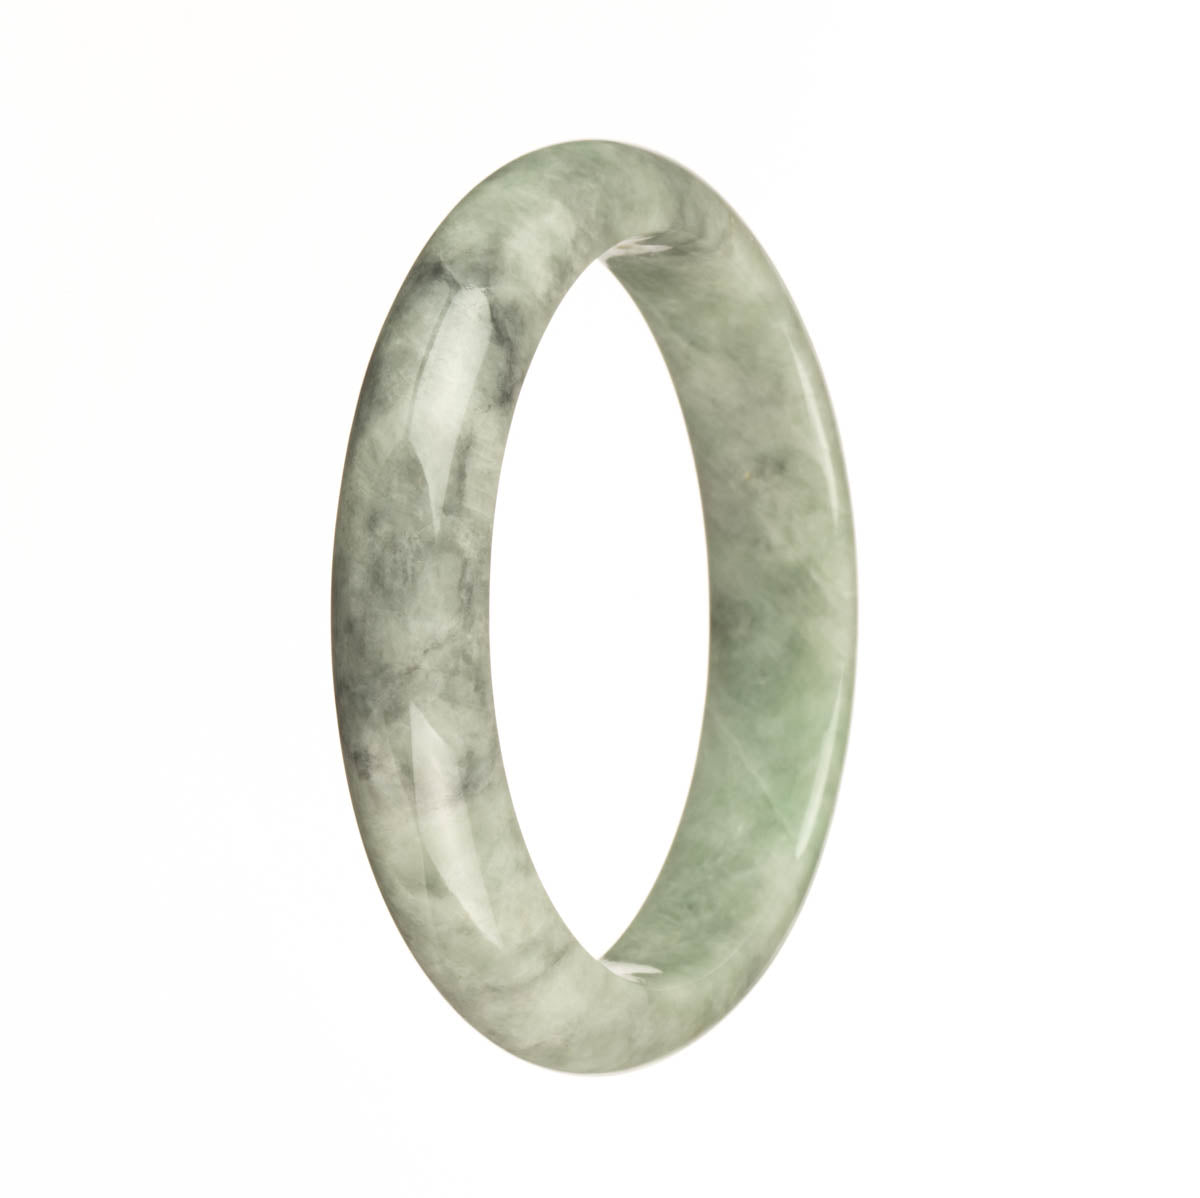 A half moon-shaped Burmese jade bangle with beautiful green color and intricate grey patterns.